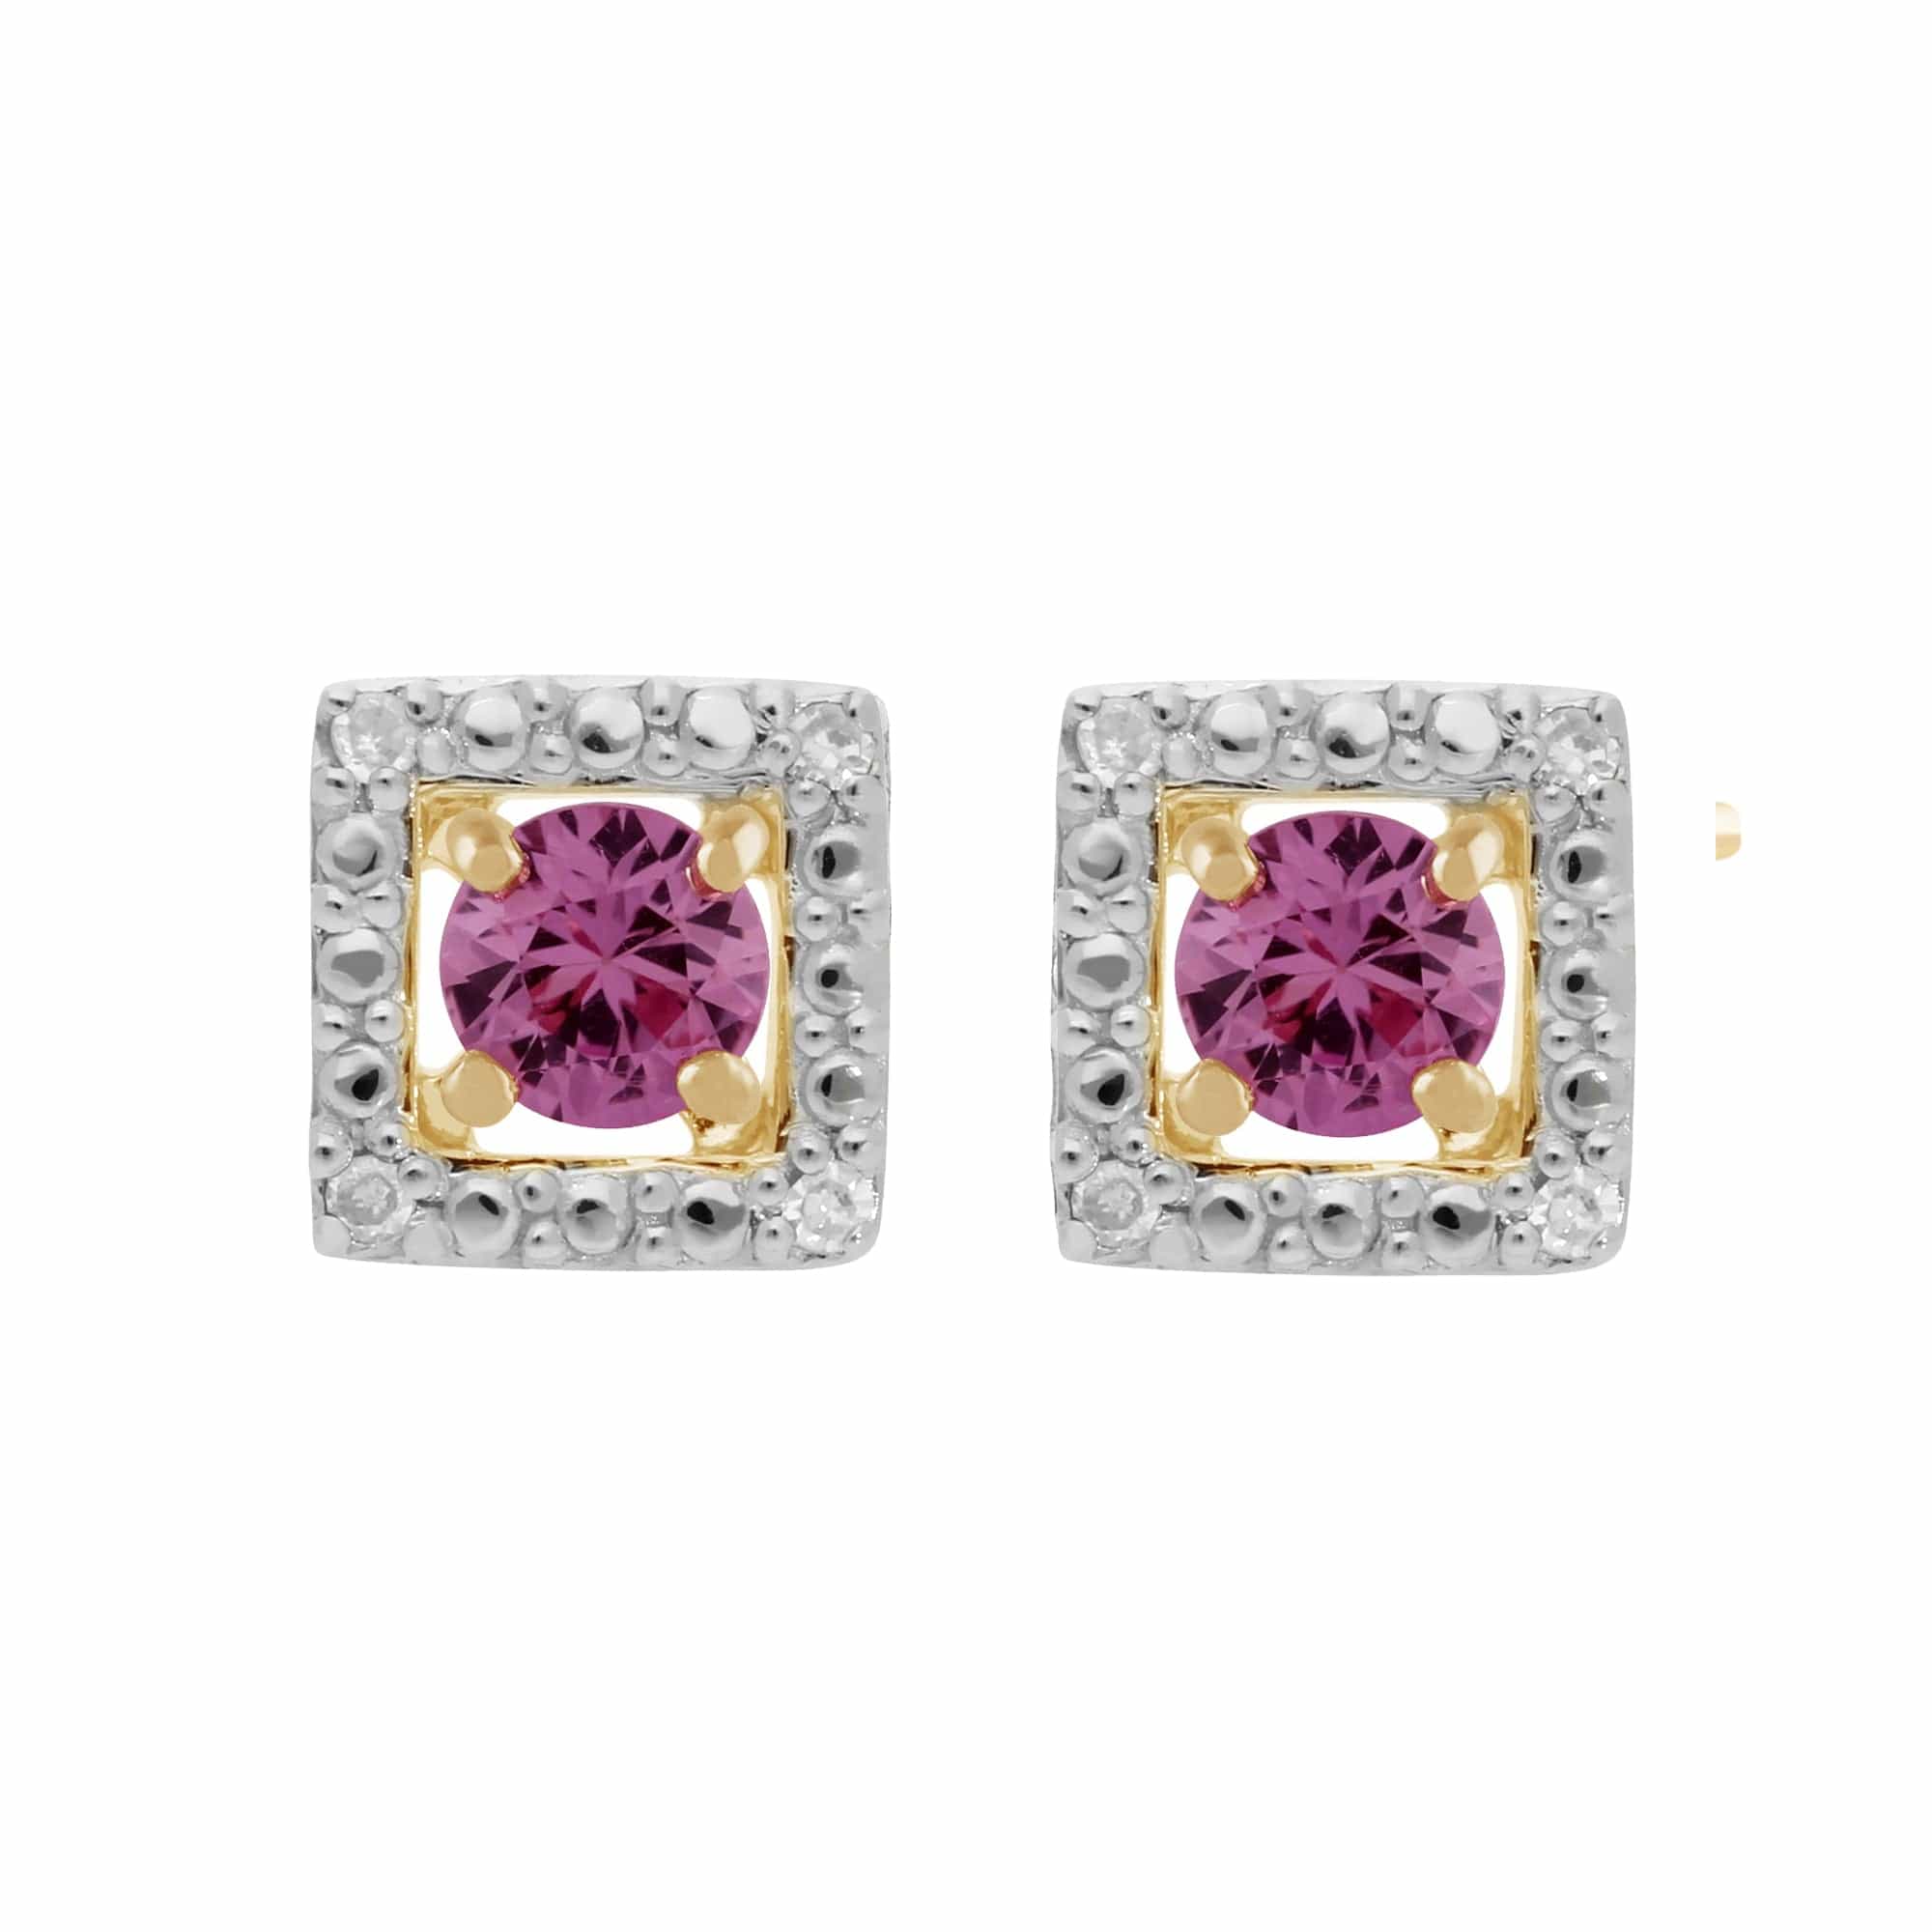 183E0083259-191E0379019 Classic Round Pink Sapphire Stud Earrings with Detachable Diamond Square Earrings Jacket Set in 9ct Yellow Gold 1